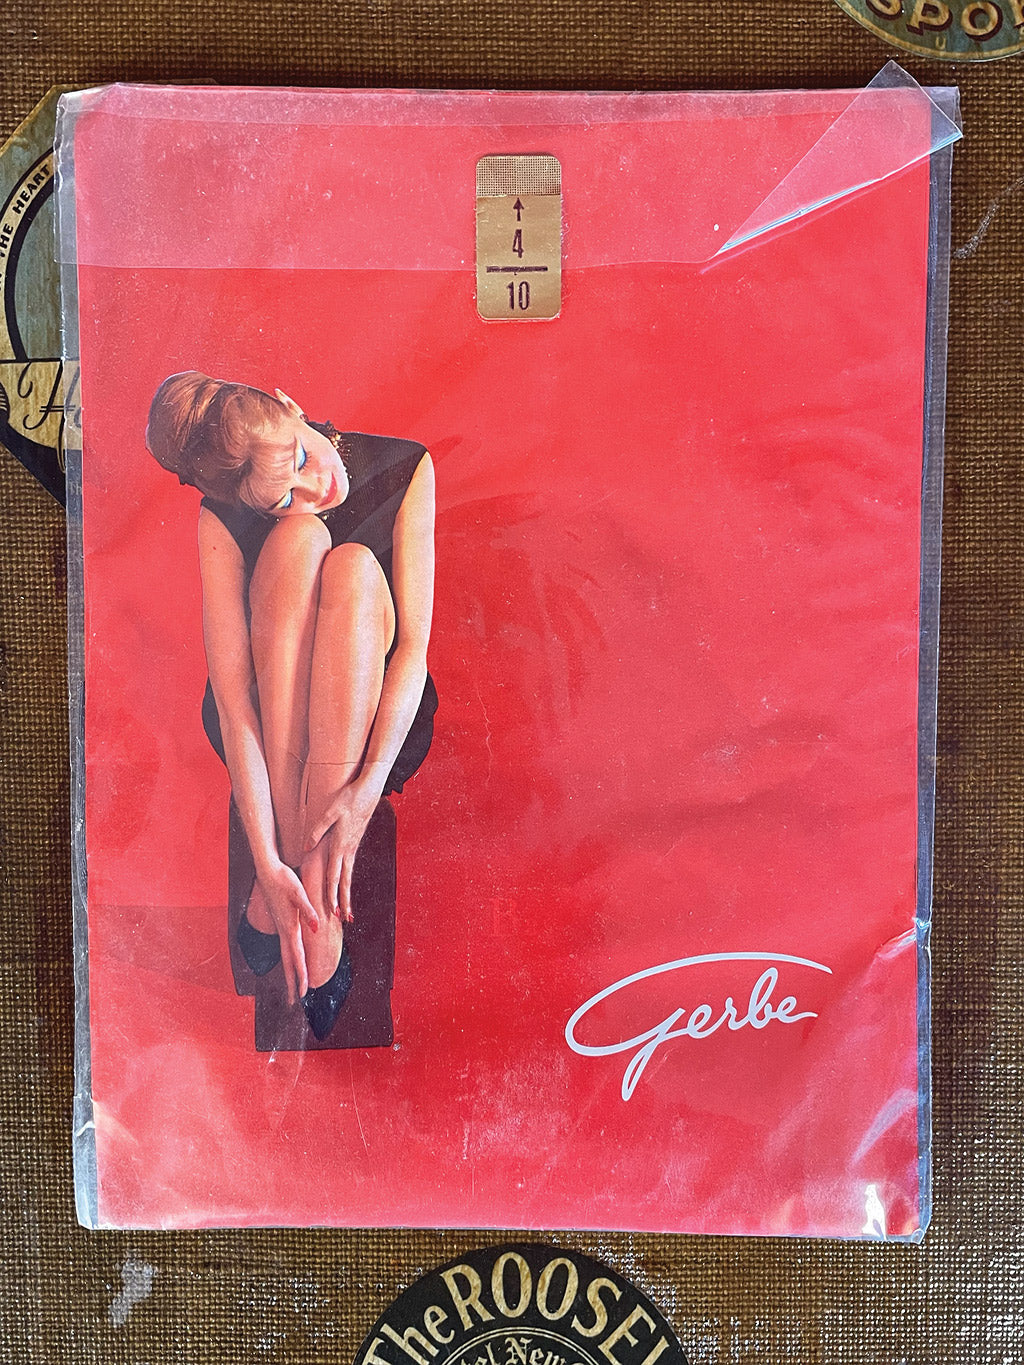 Vintage Gerbe Corail Fully Fashioned Stockings VS053